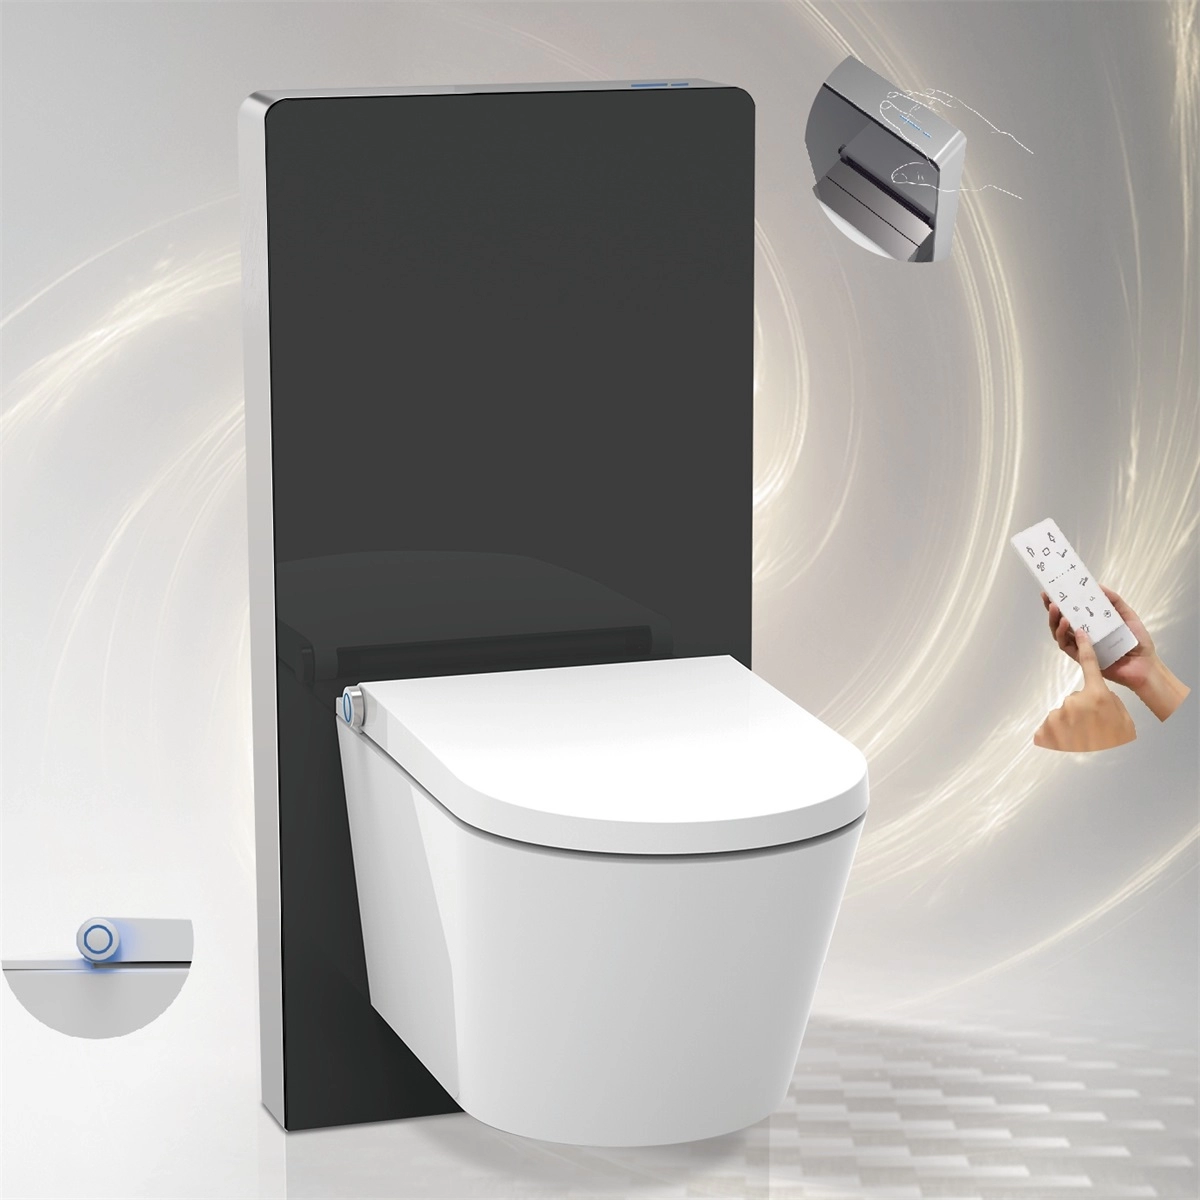 Smart toilet with black toilet Cabinet cistern